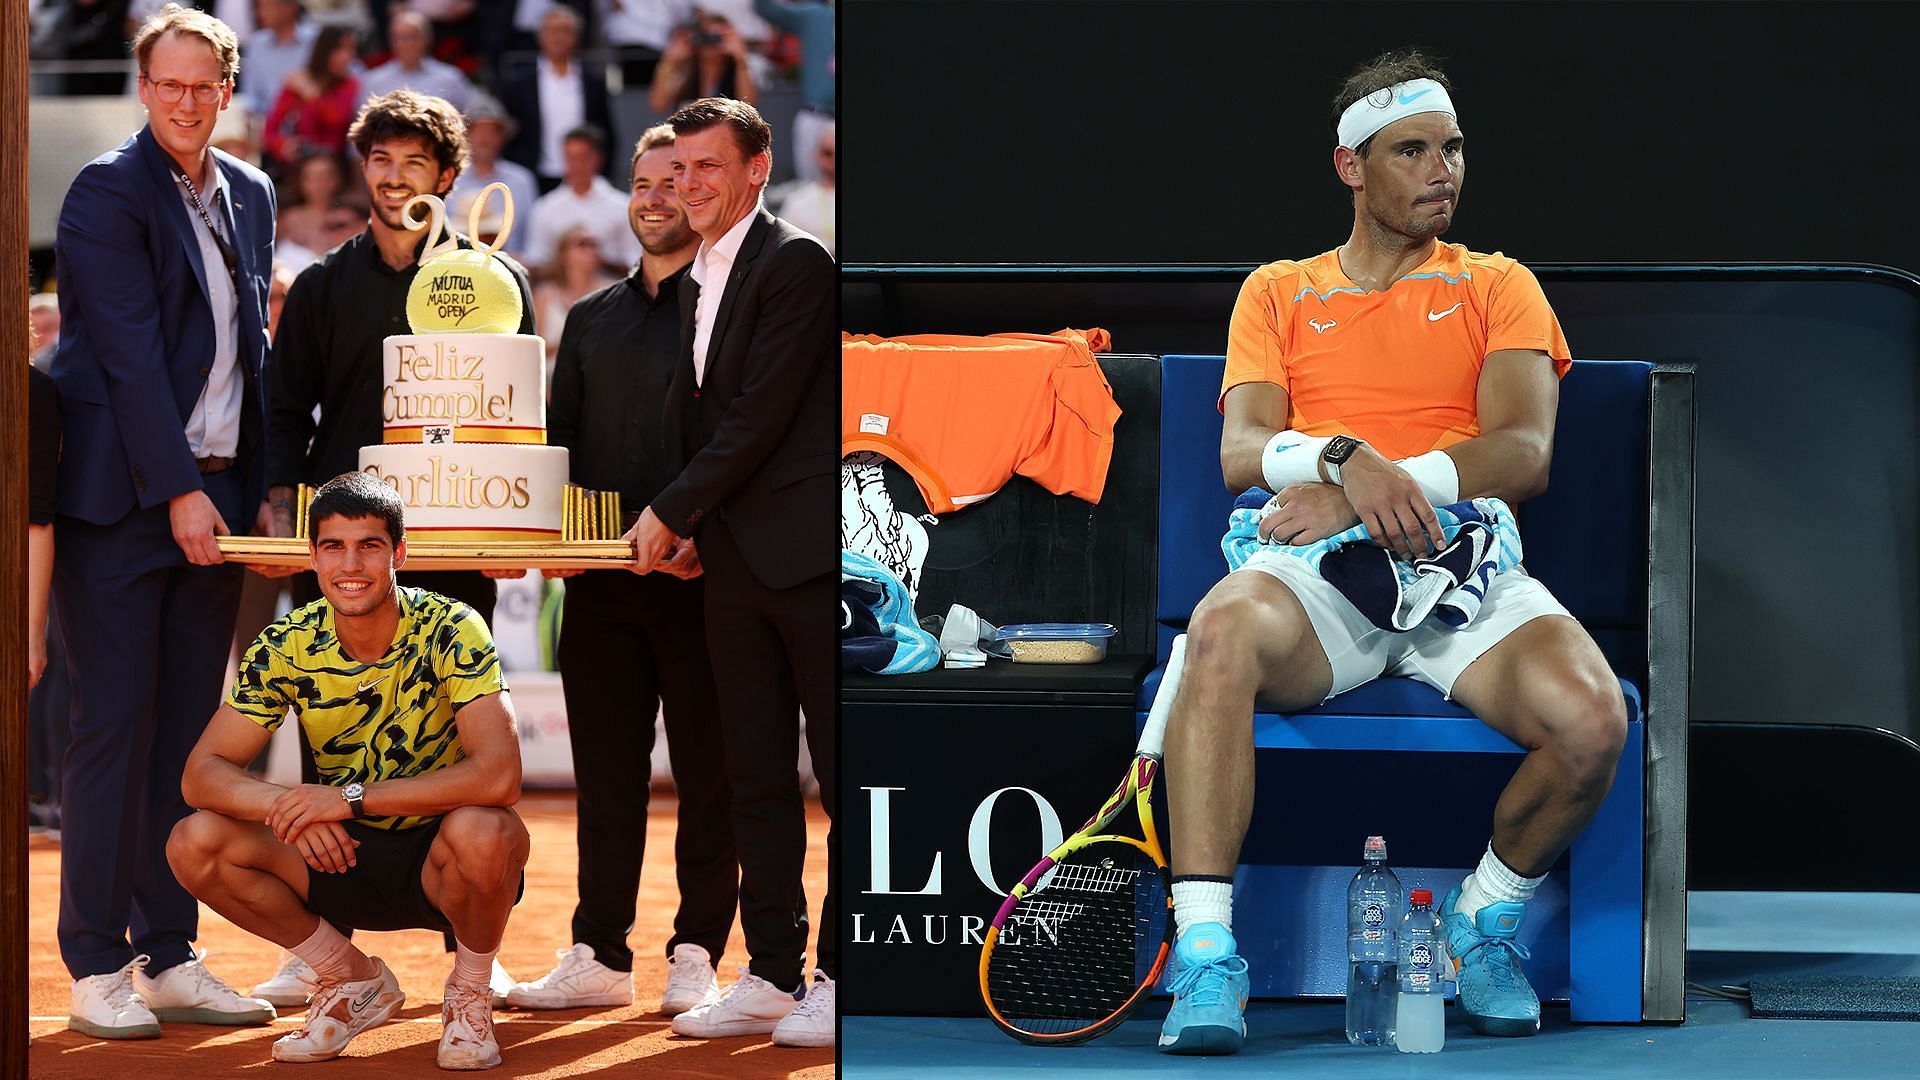 The tennis world was rocked by news of Rafael Nadal